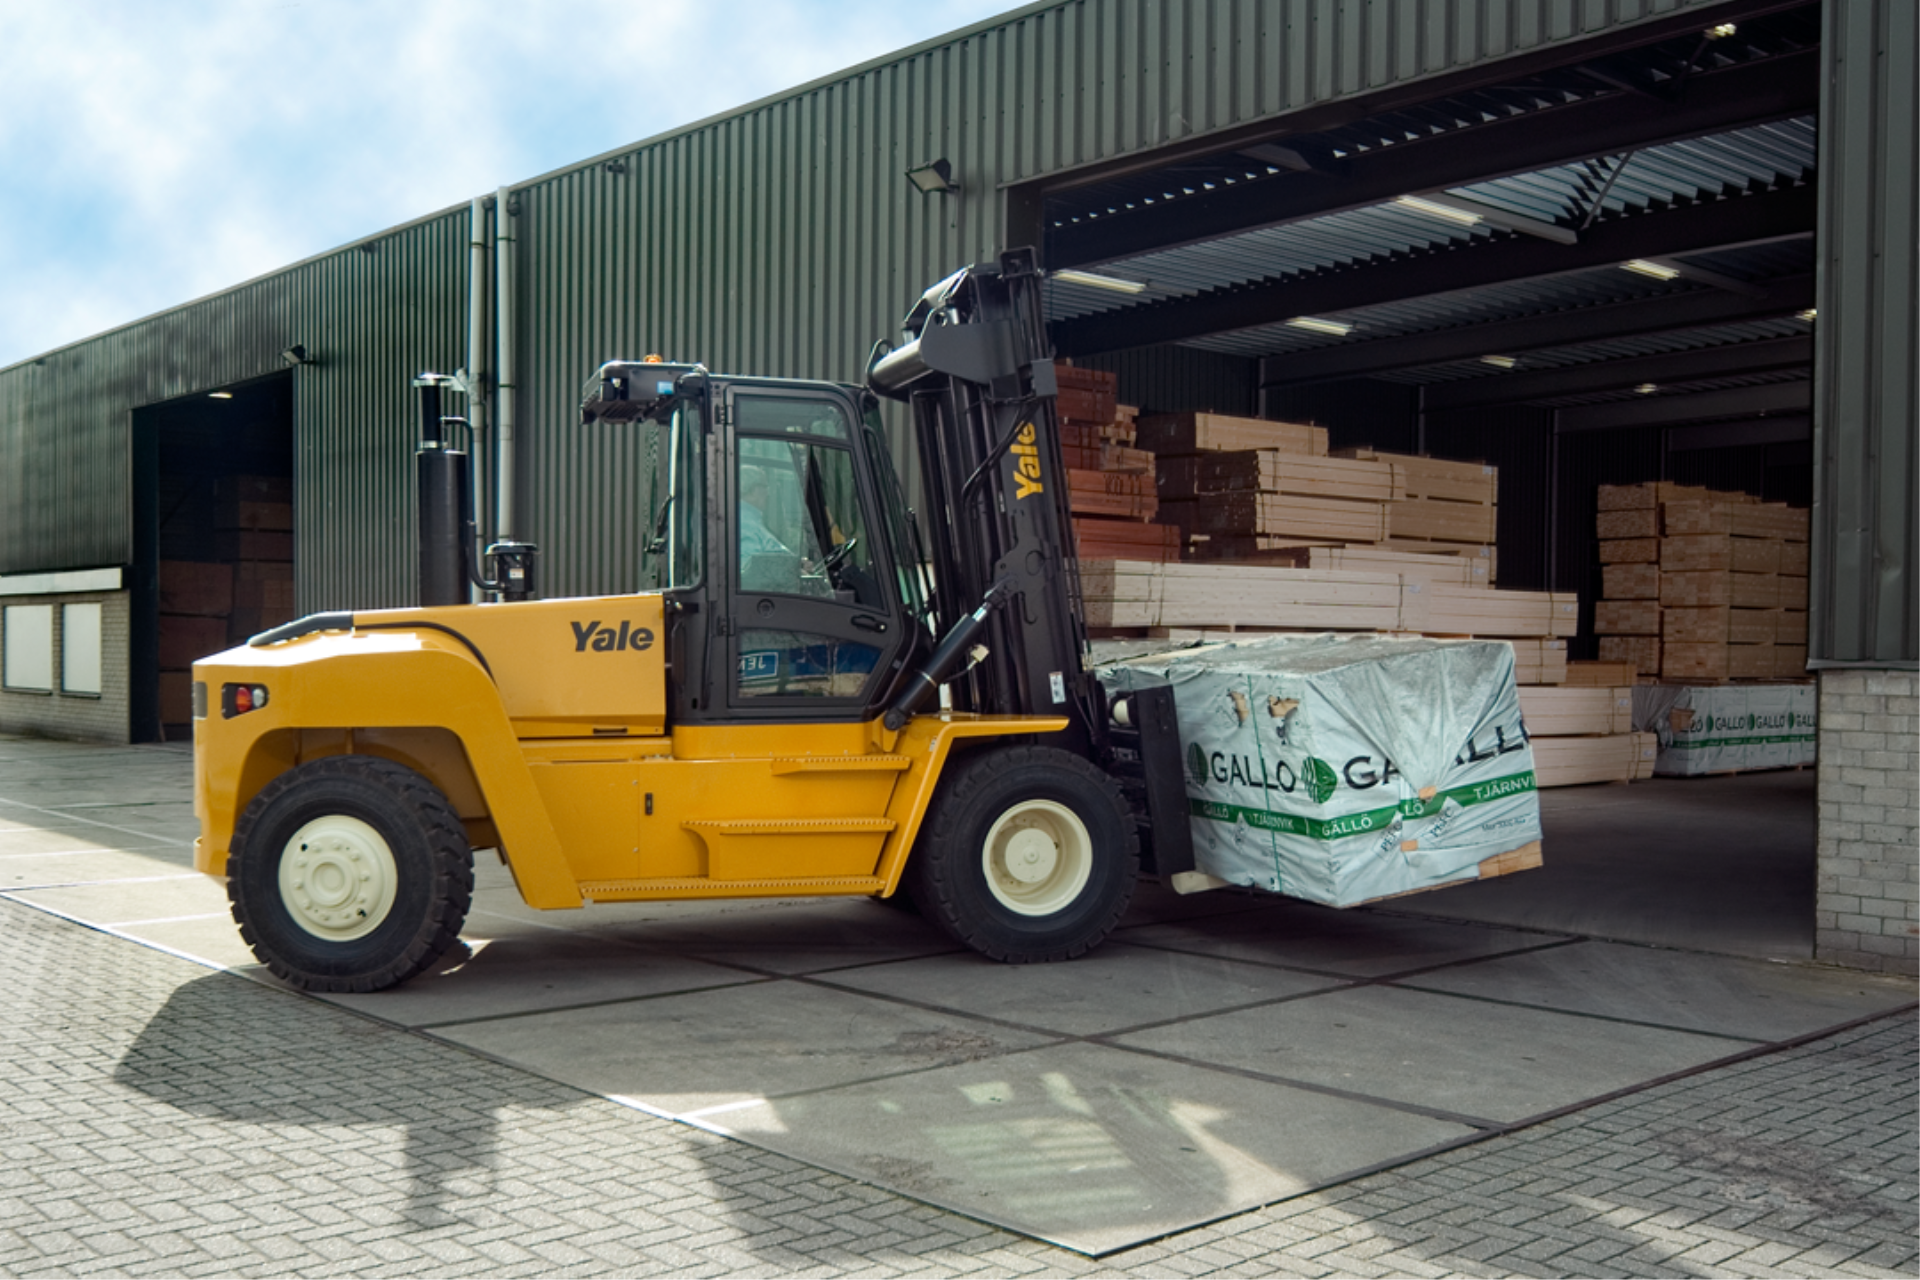 Maintenance requirements for electric forklifts are more simple than diesel forklifts